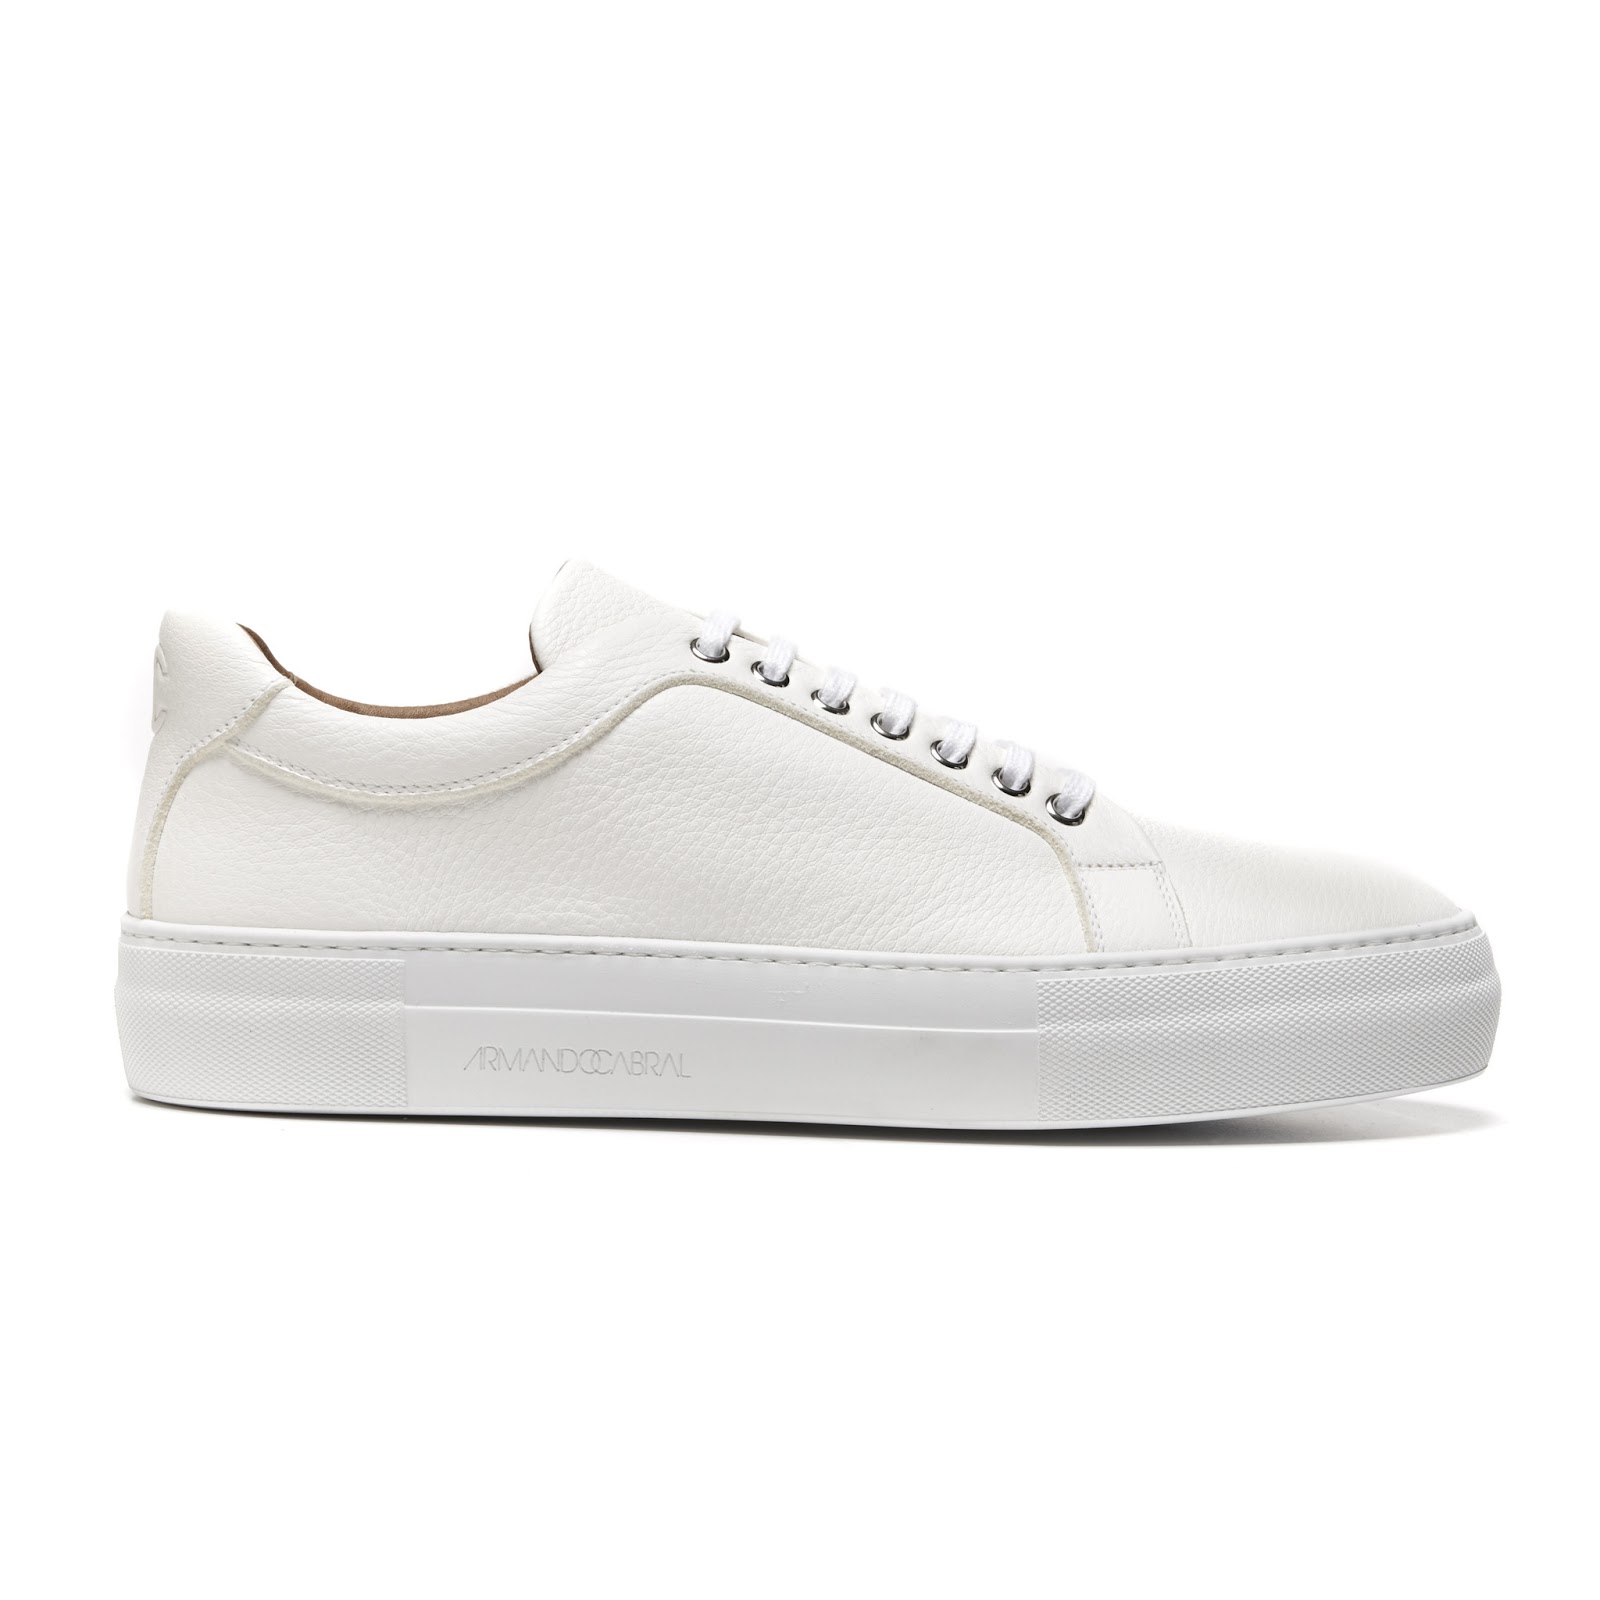 Easy Like A Spring Day: Armando Cabral Broome Sneakers | SHOEOGRAPHY